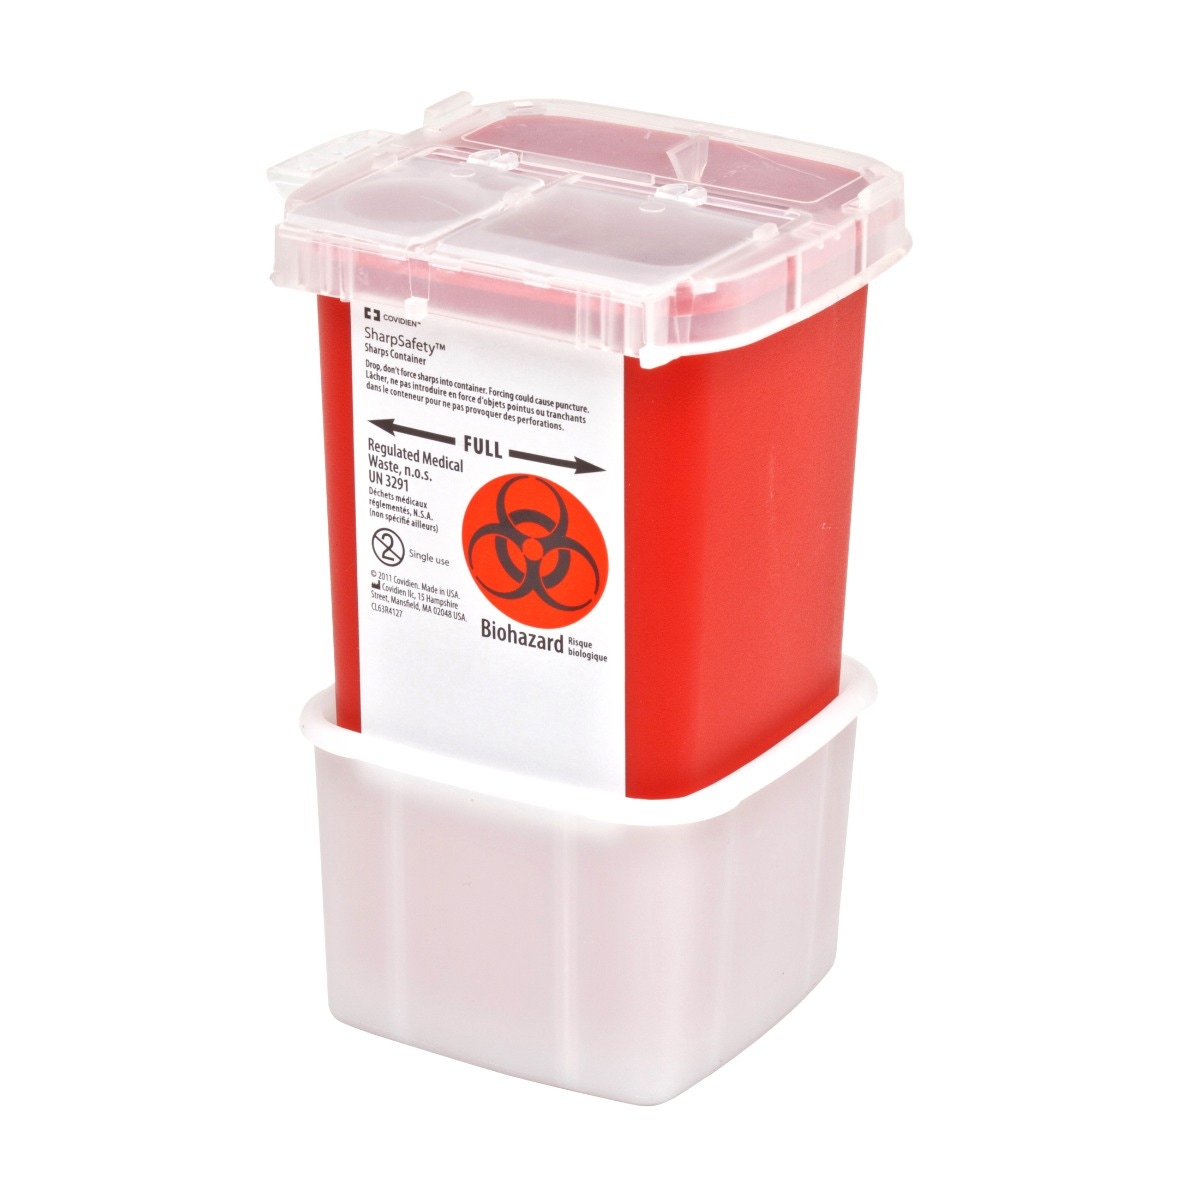 Sharps Container, one gallon